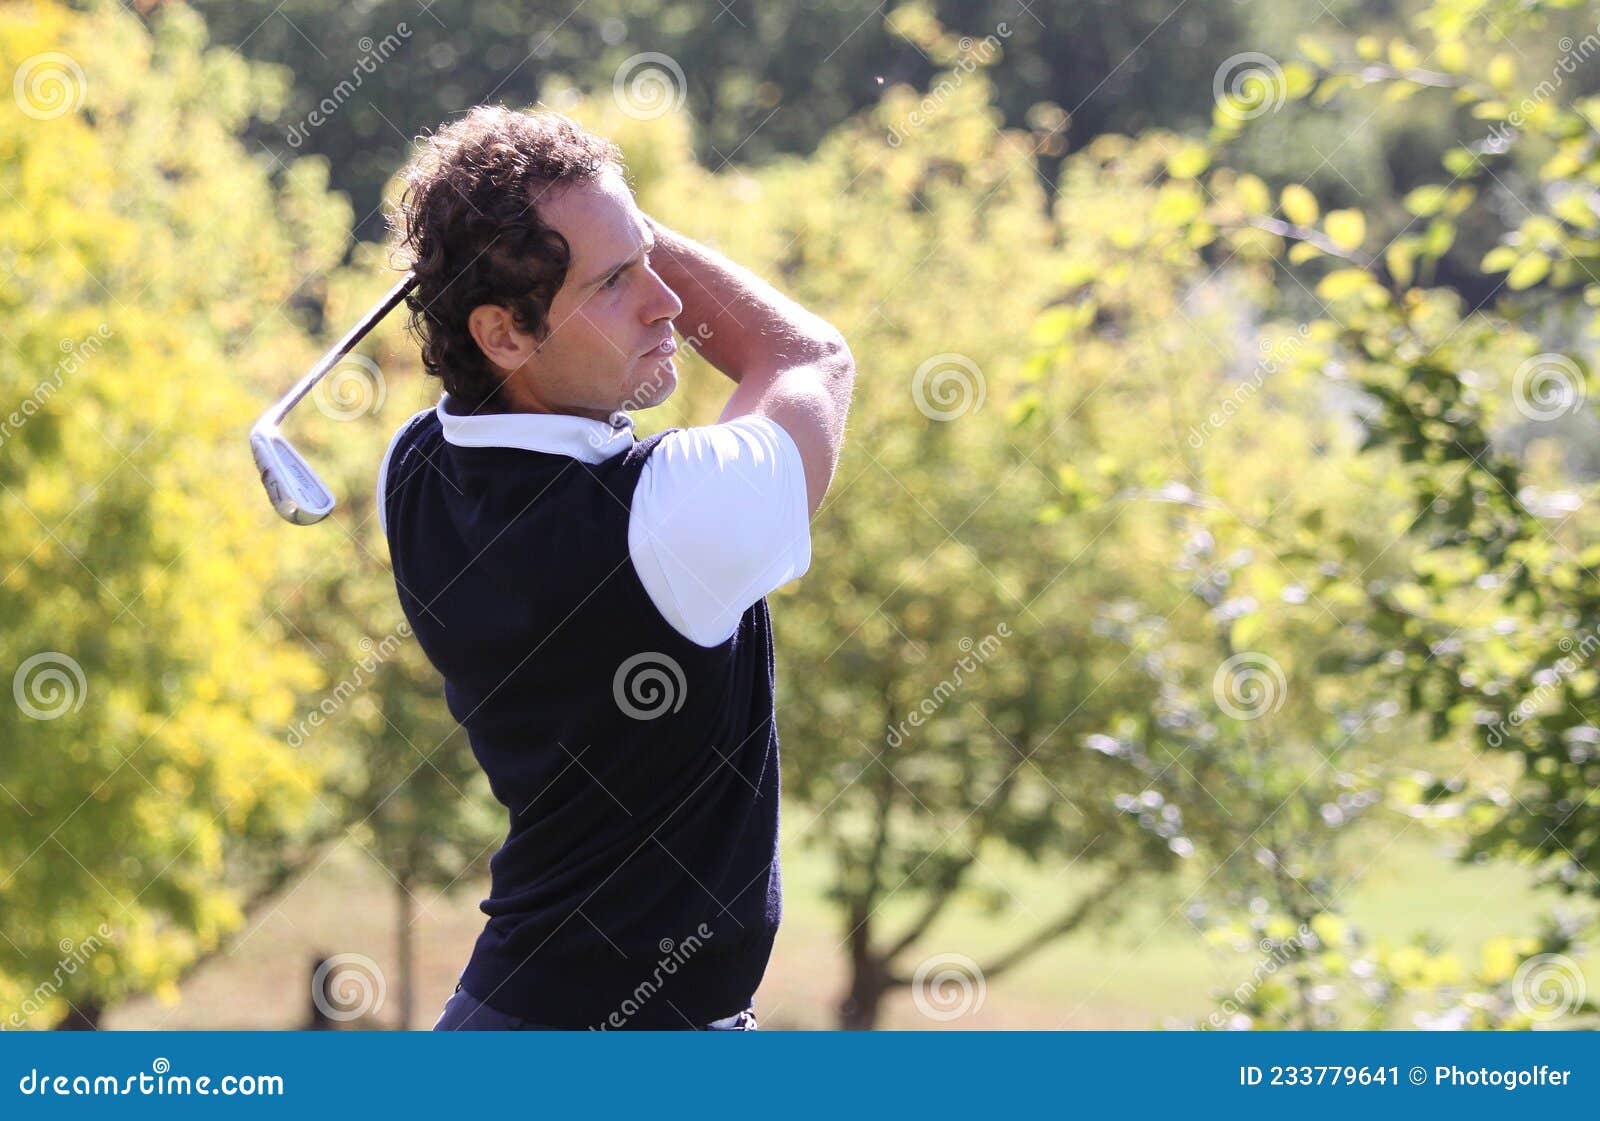 Golfer in Action at Stade Francais Open 2008 in Courson Editorial Photo ...